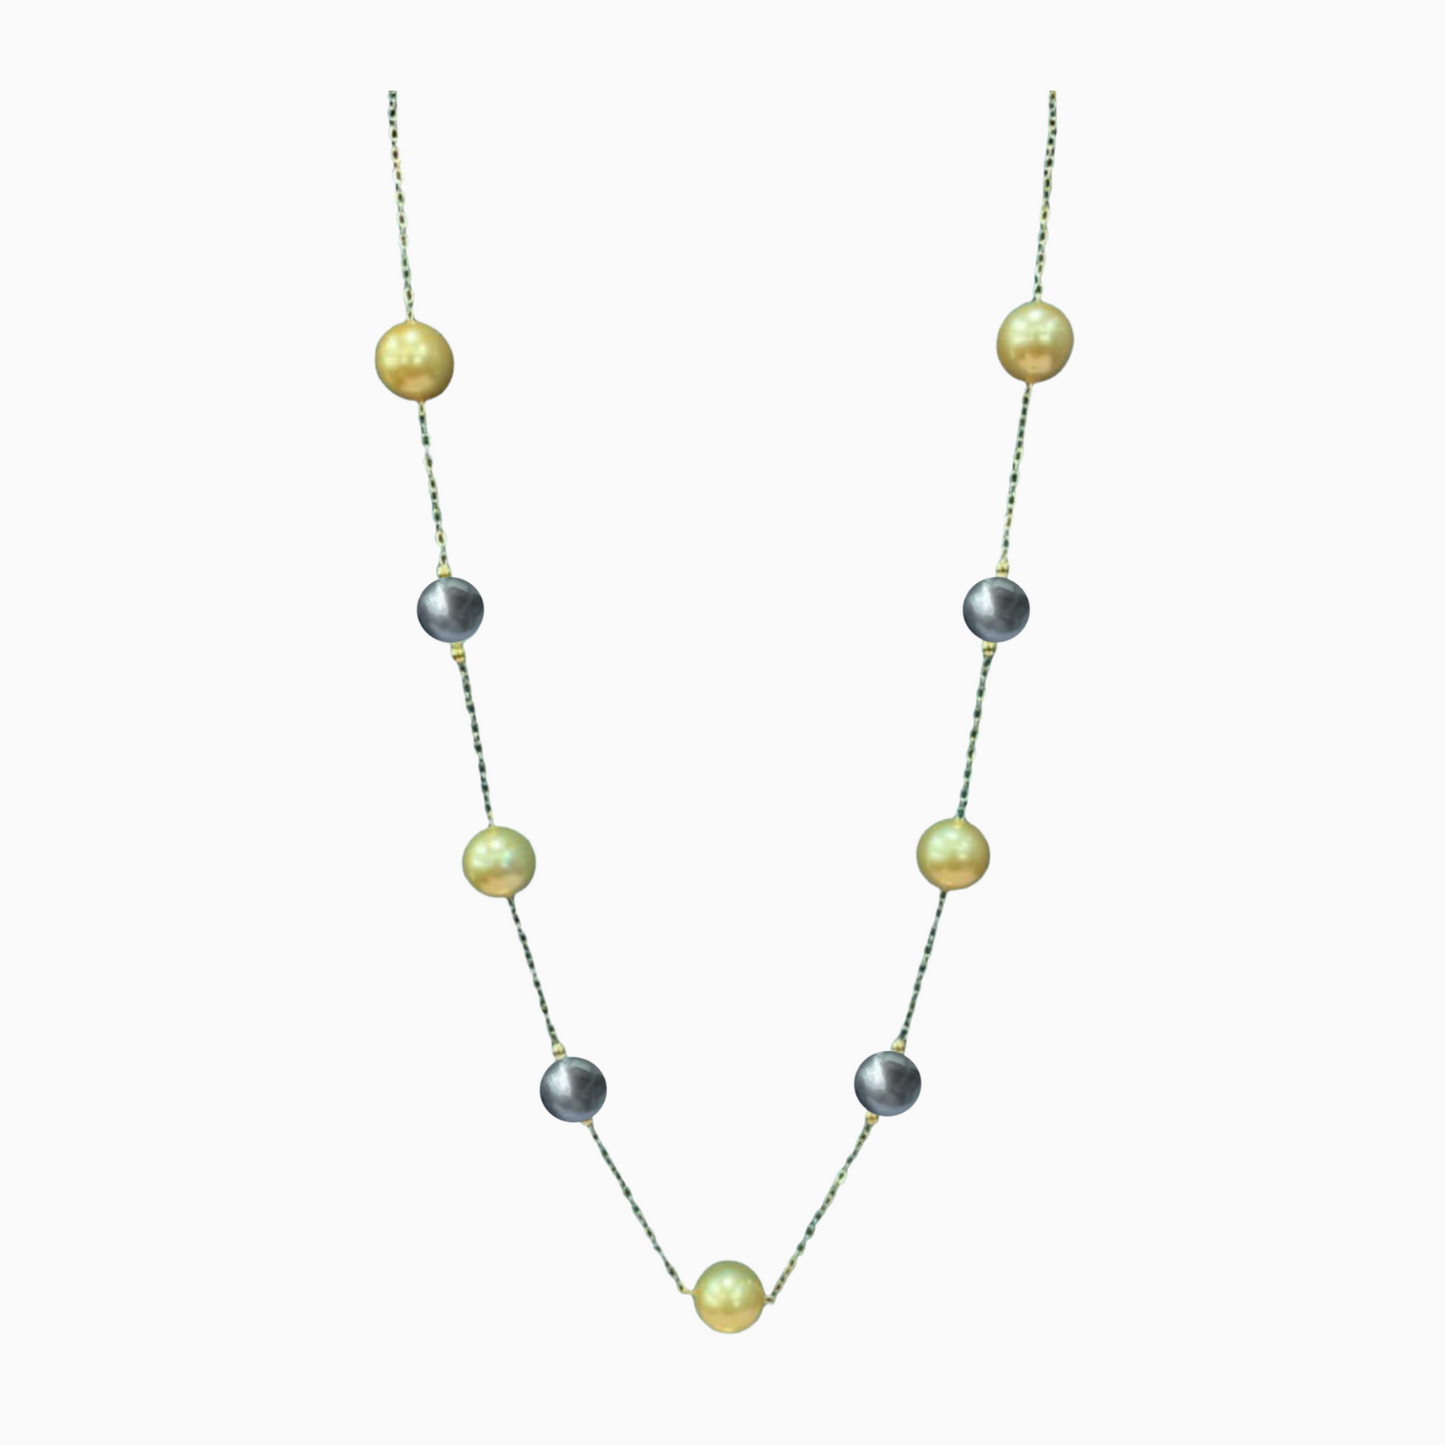 Station South Sea Pearl Necklace in 14K Gold